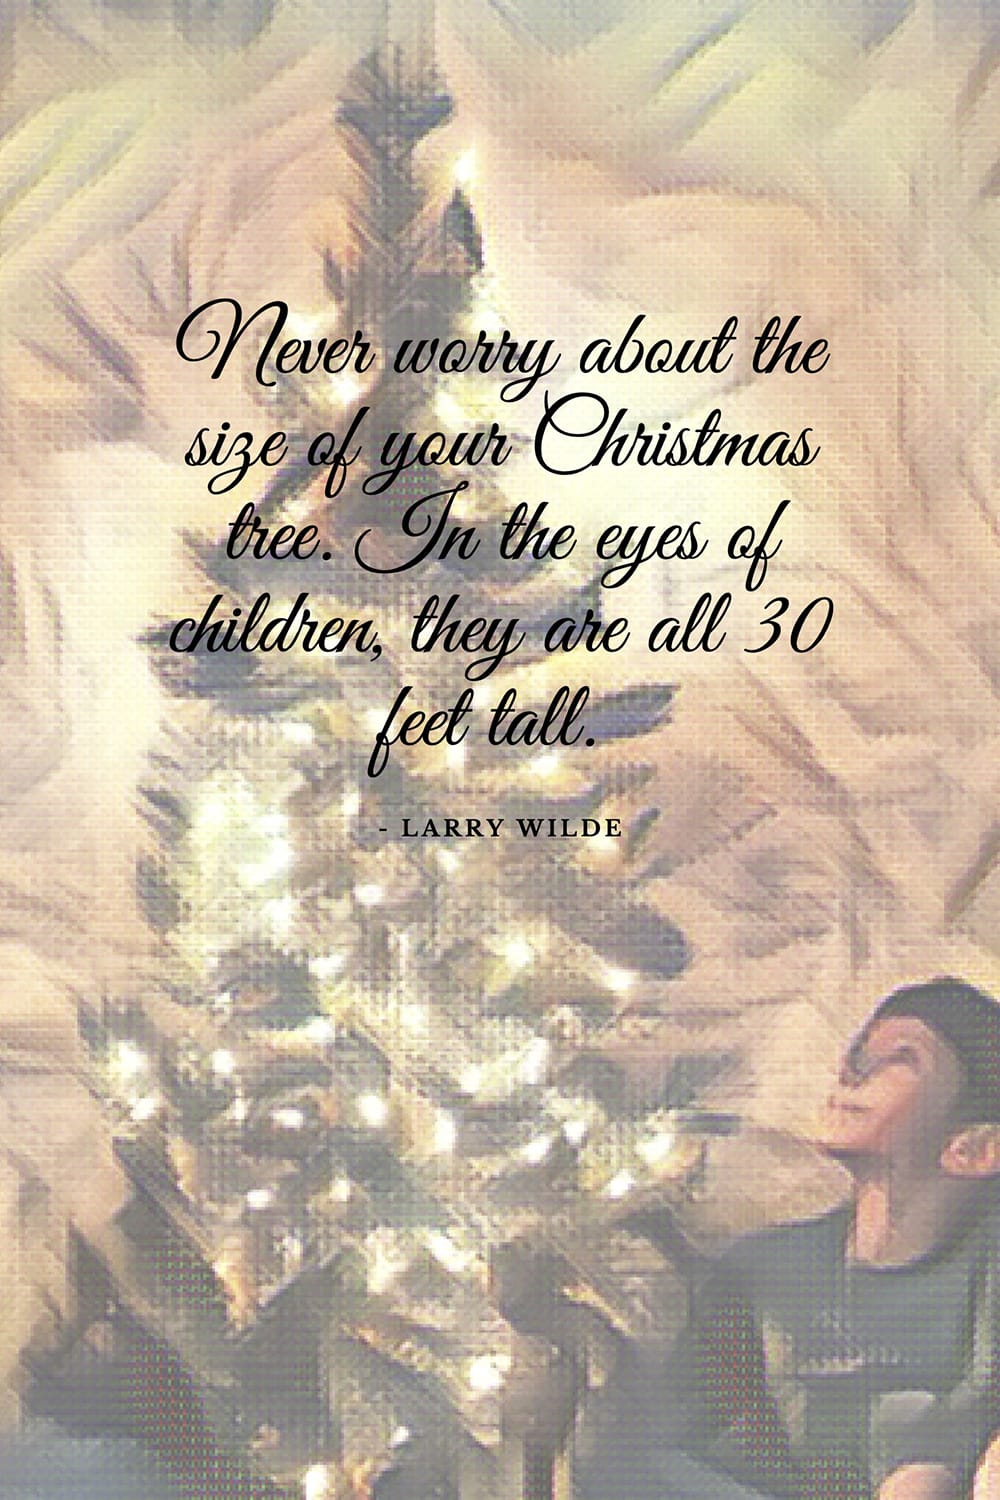 Best short Christmas quotes 17